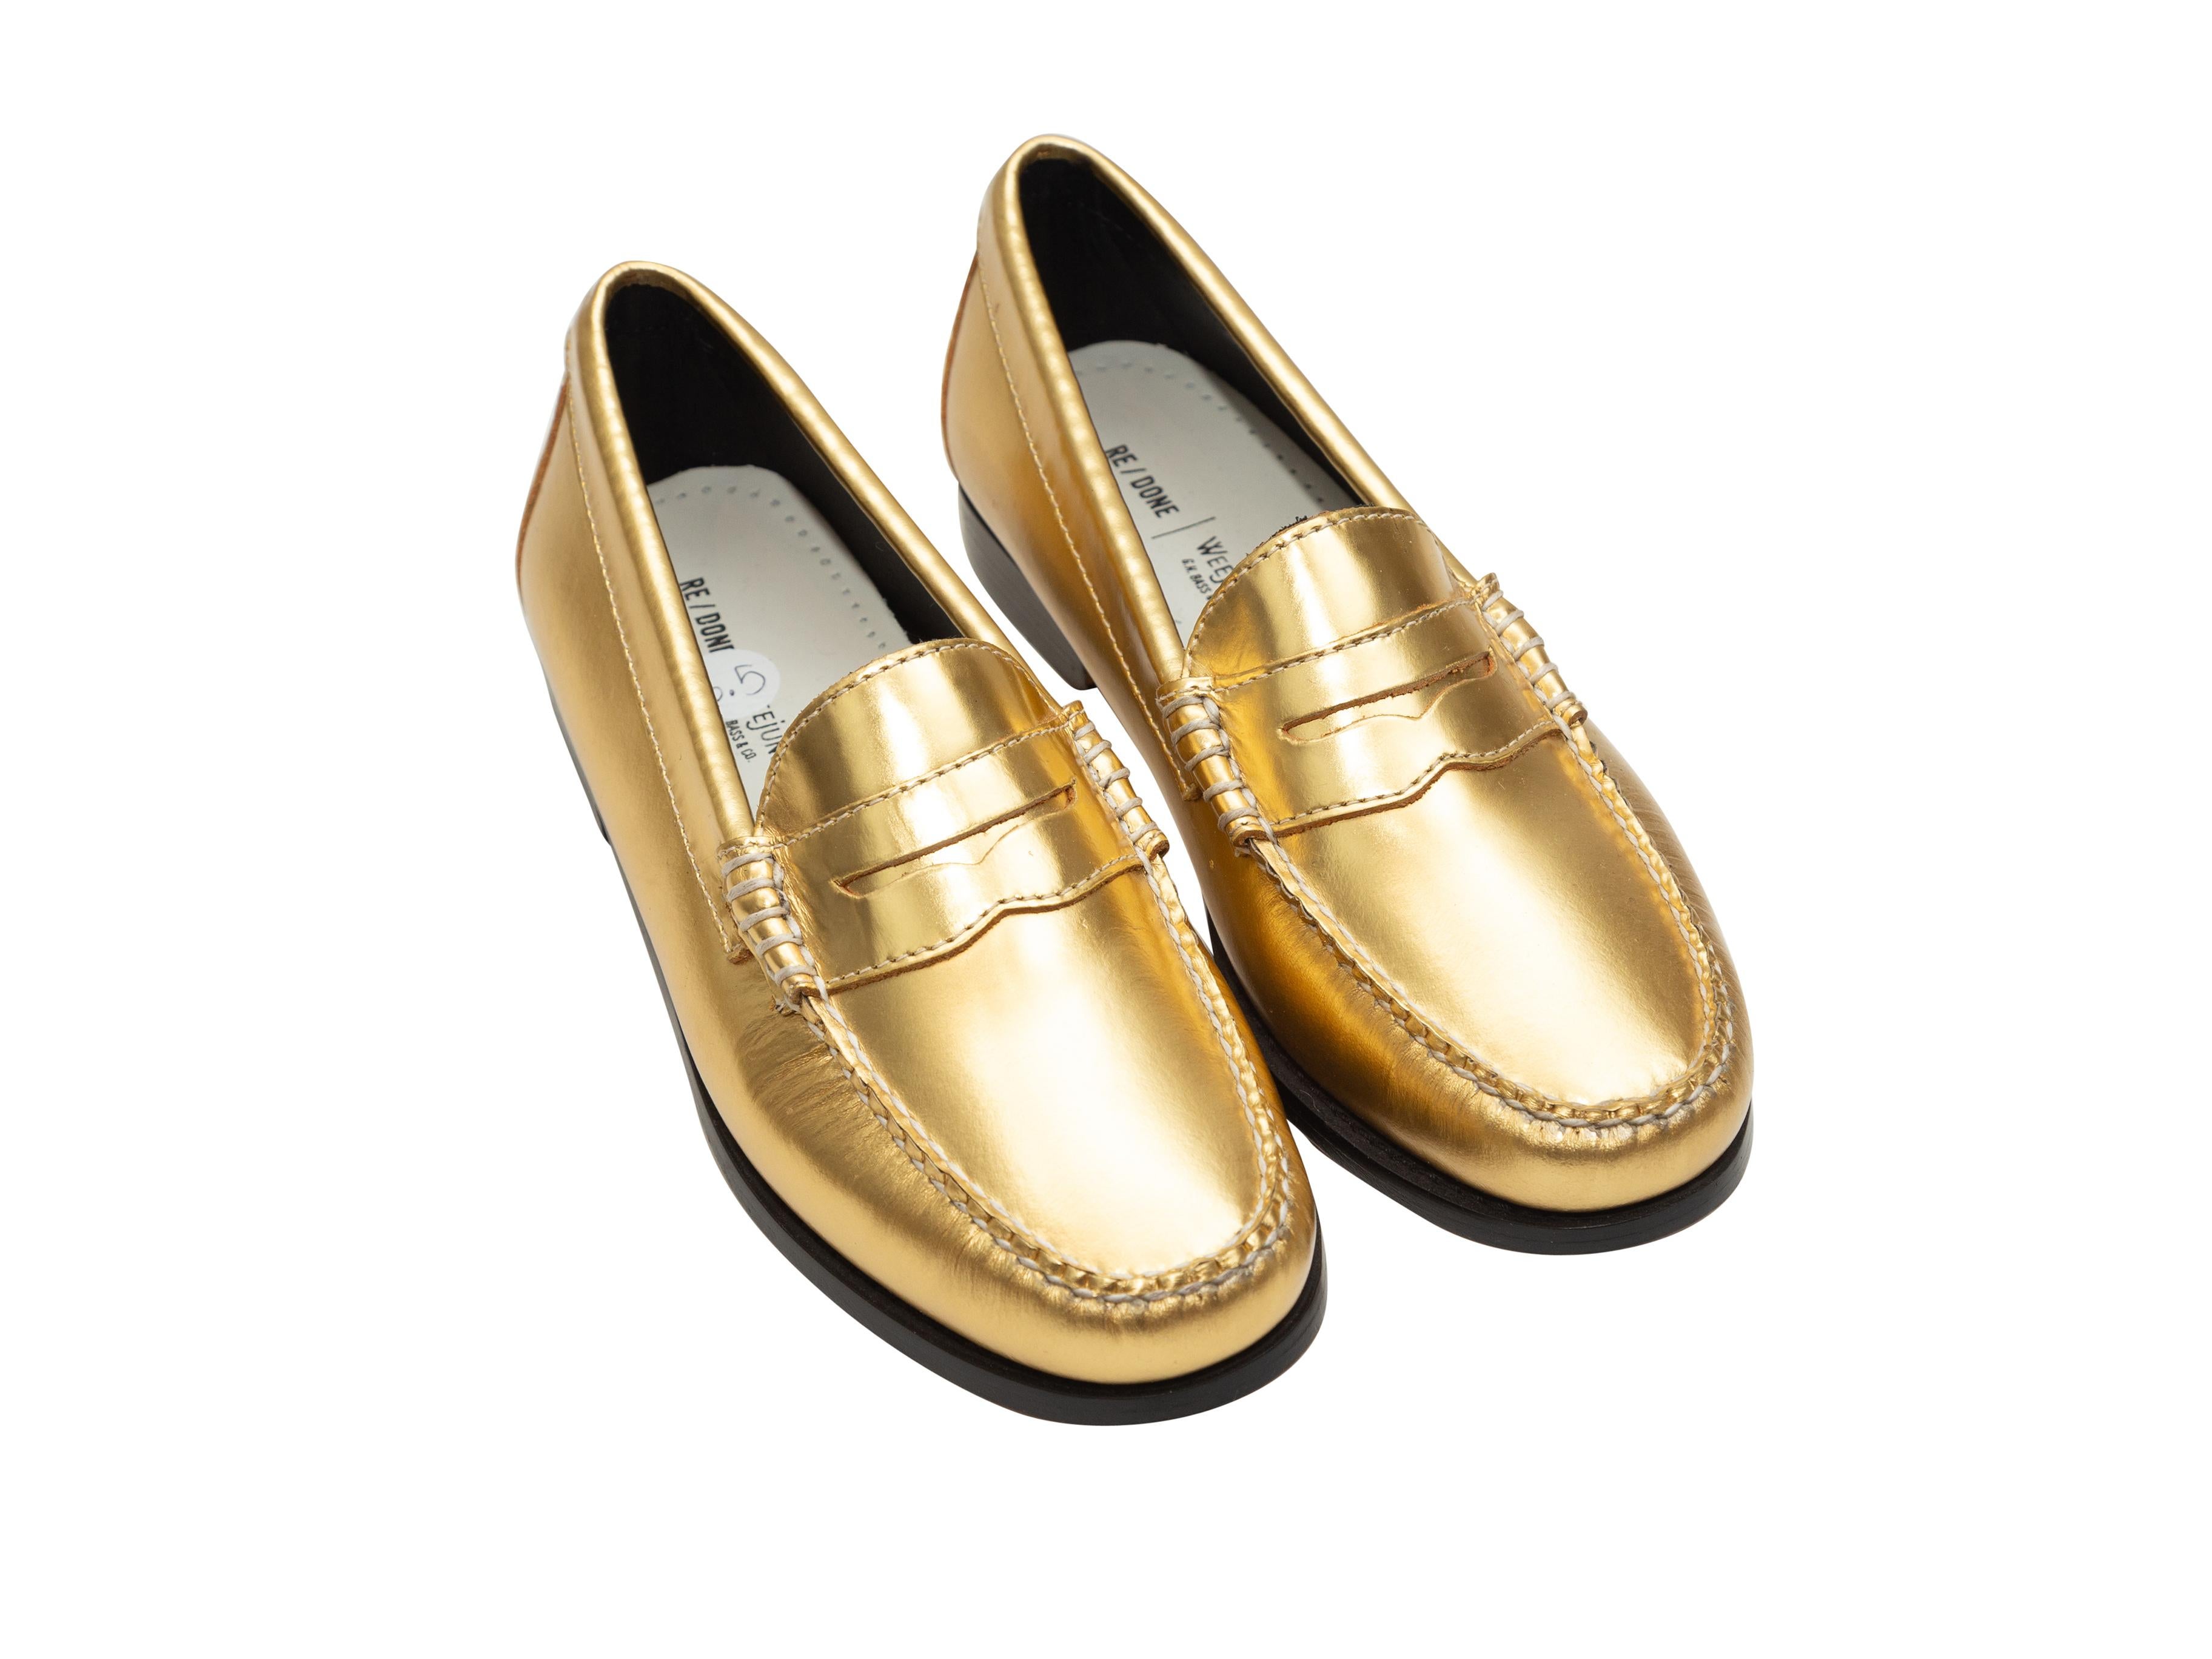 Product details: Gold metallic leather penny loafers by Weejuns x RE/DONE. 0.75